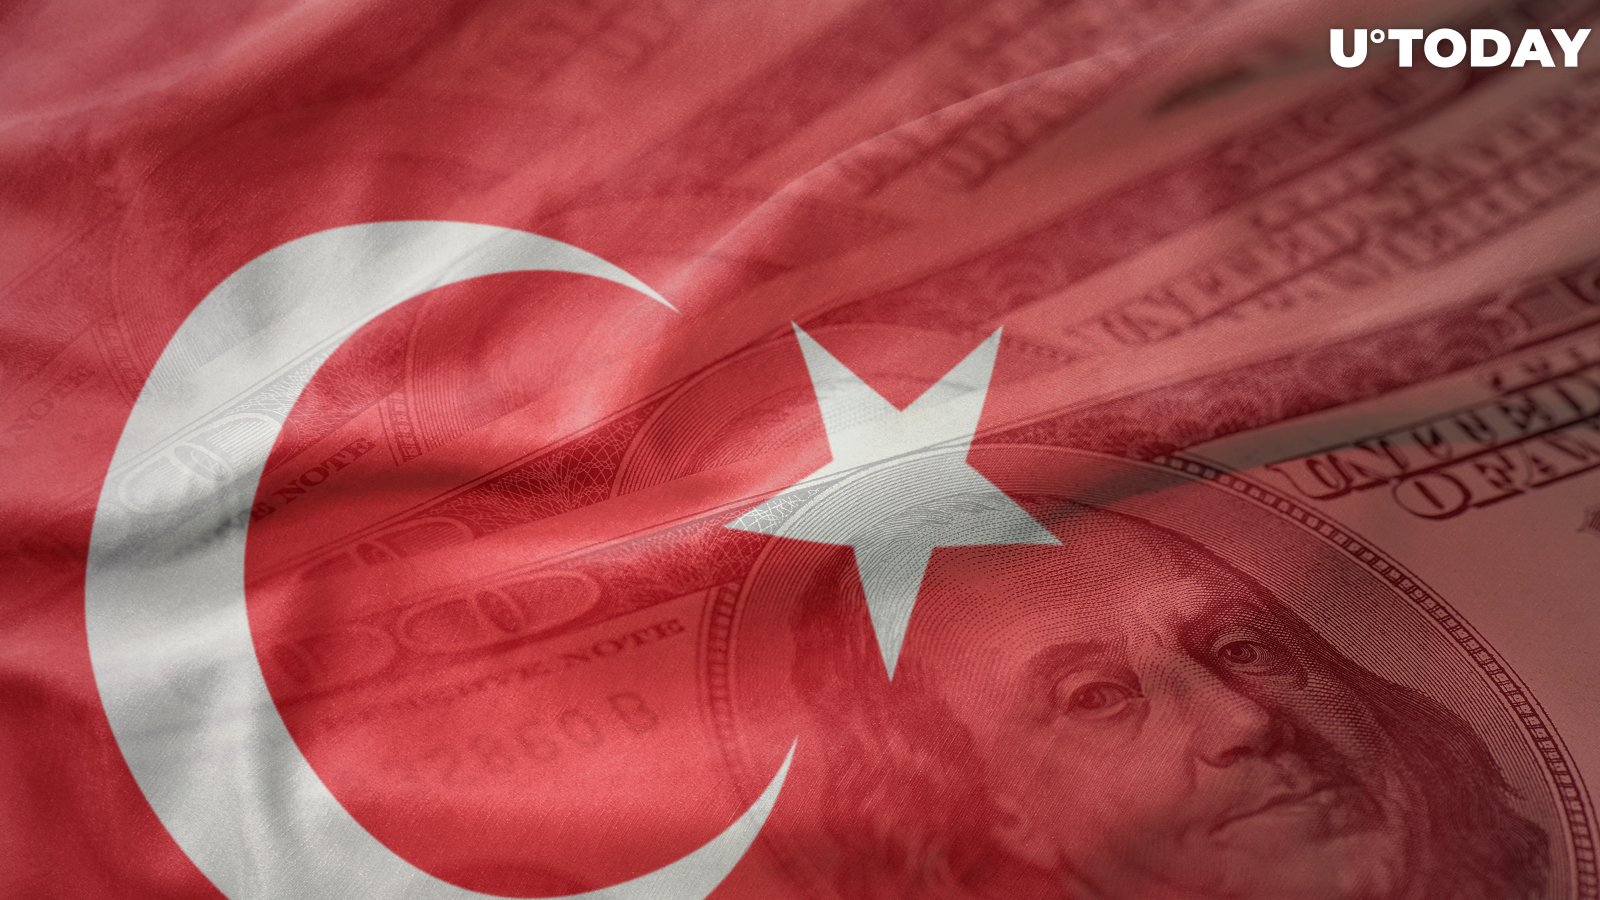 BREAKING: Hundreds of Millions of Dollars Allegedly Stolen from Major Turkish Crypto Exchange